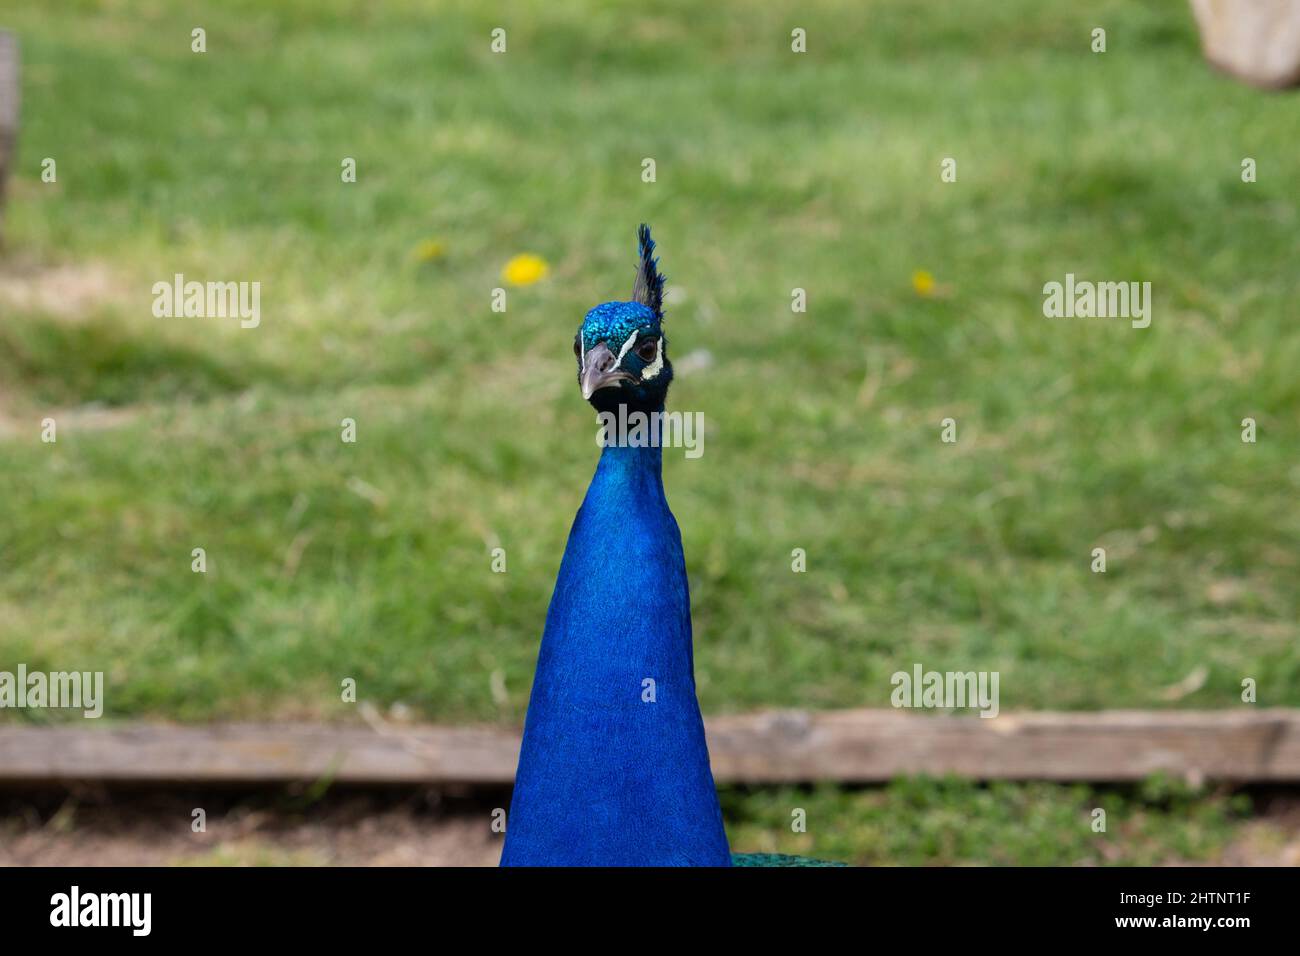 head and neck of a bright blue male Indian Blue Peacock (Pavo cristatus) with a path edge and green grass in the background Stock Photo